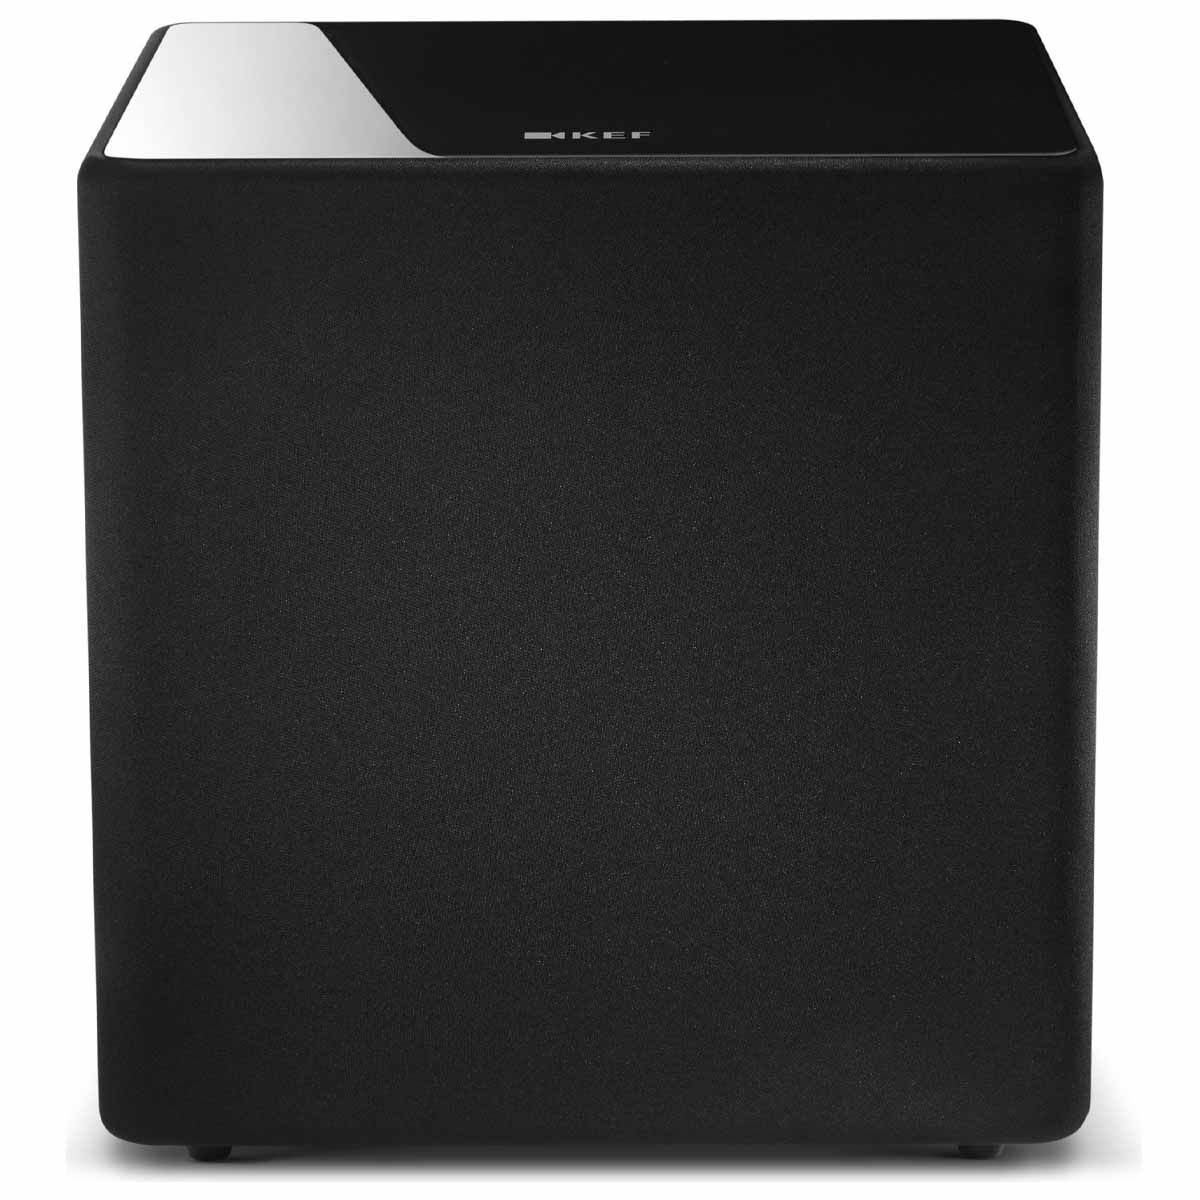 KEF KUBE12b 12-inch Bass Driver Active Subwoofer - Gloss Black - Each - front view